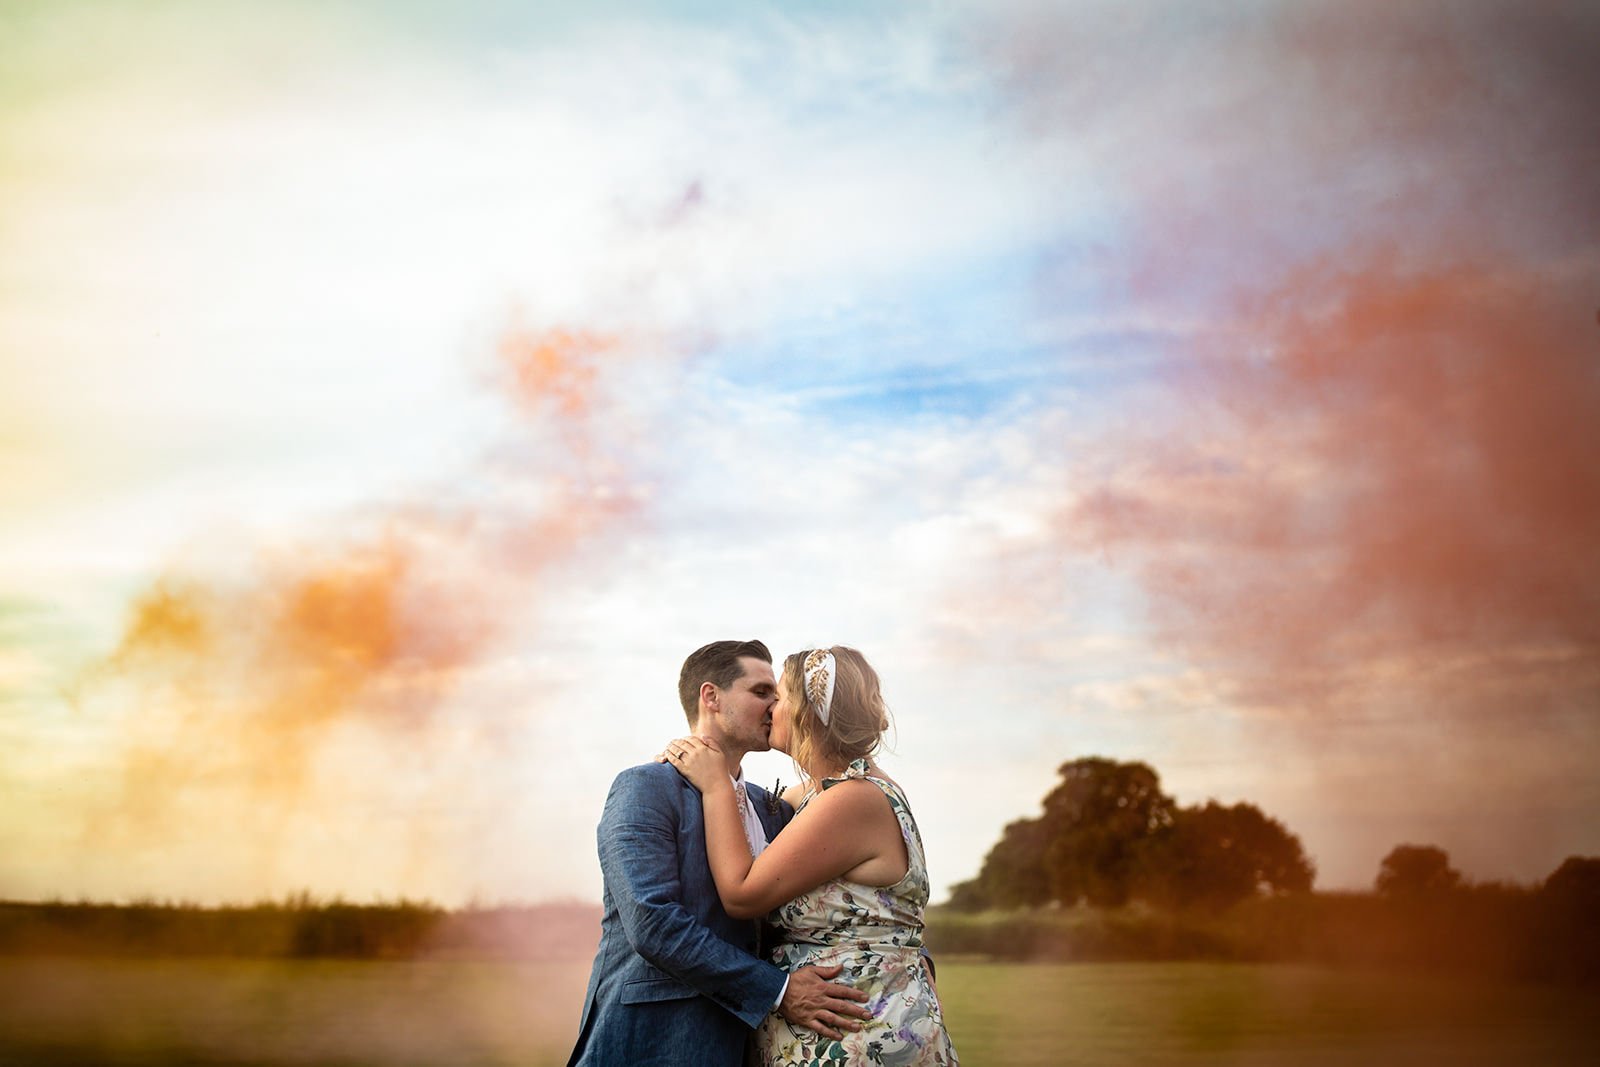 Everything you need to know about SMOKE BOMBS at your wedding